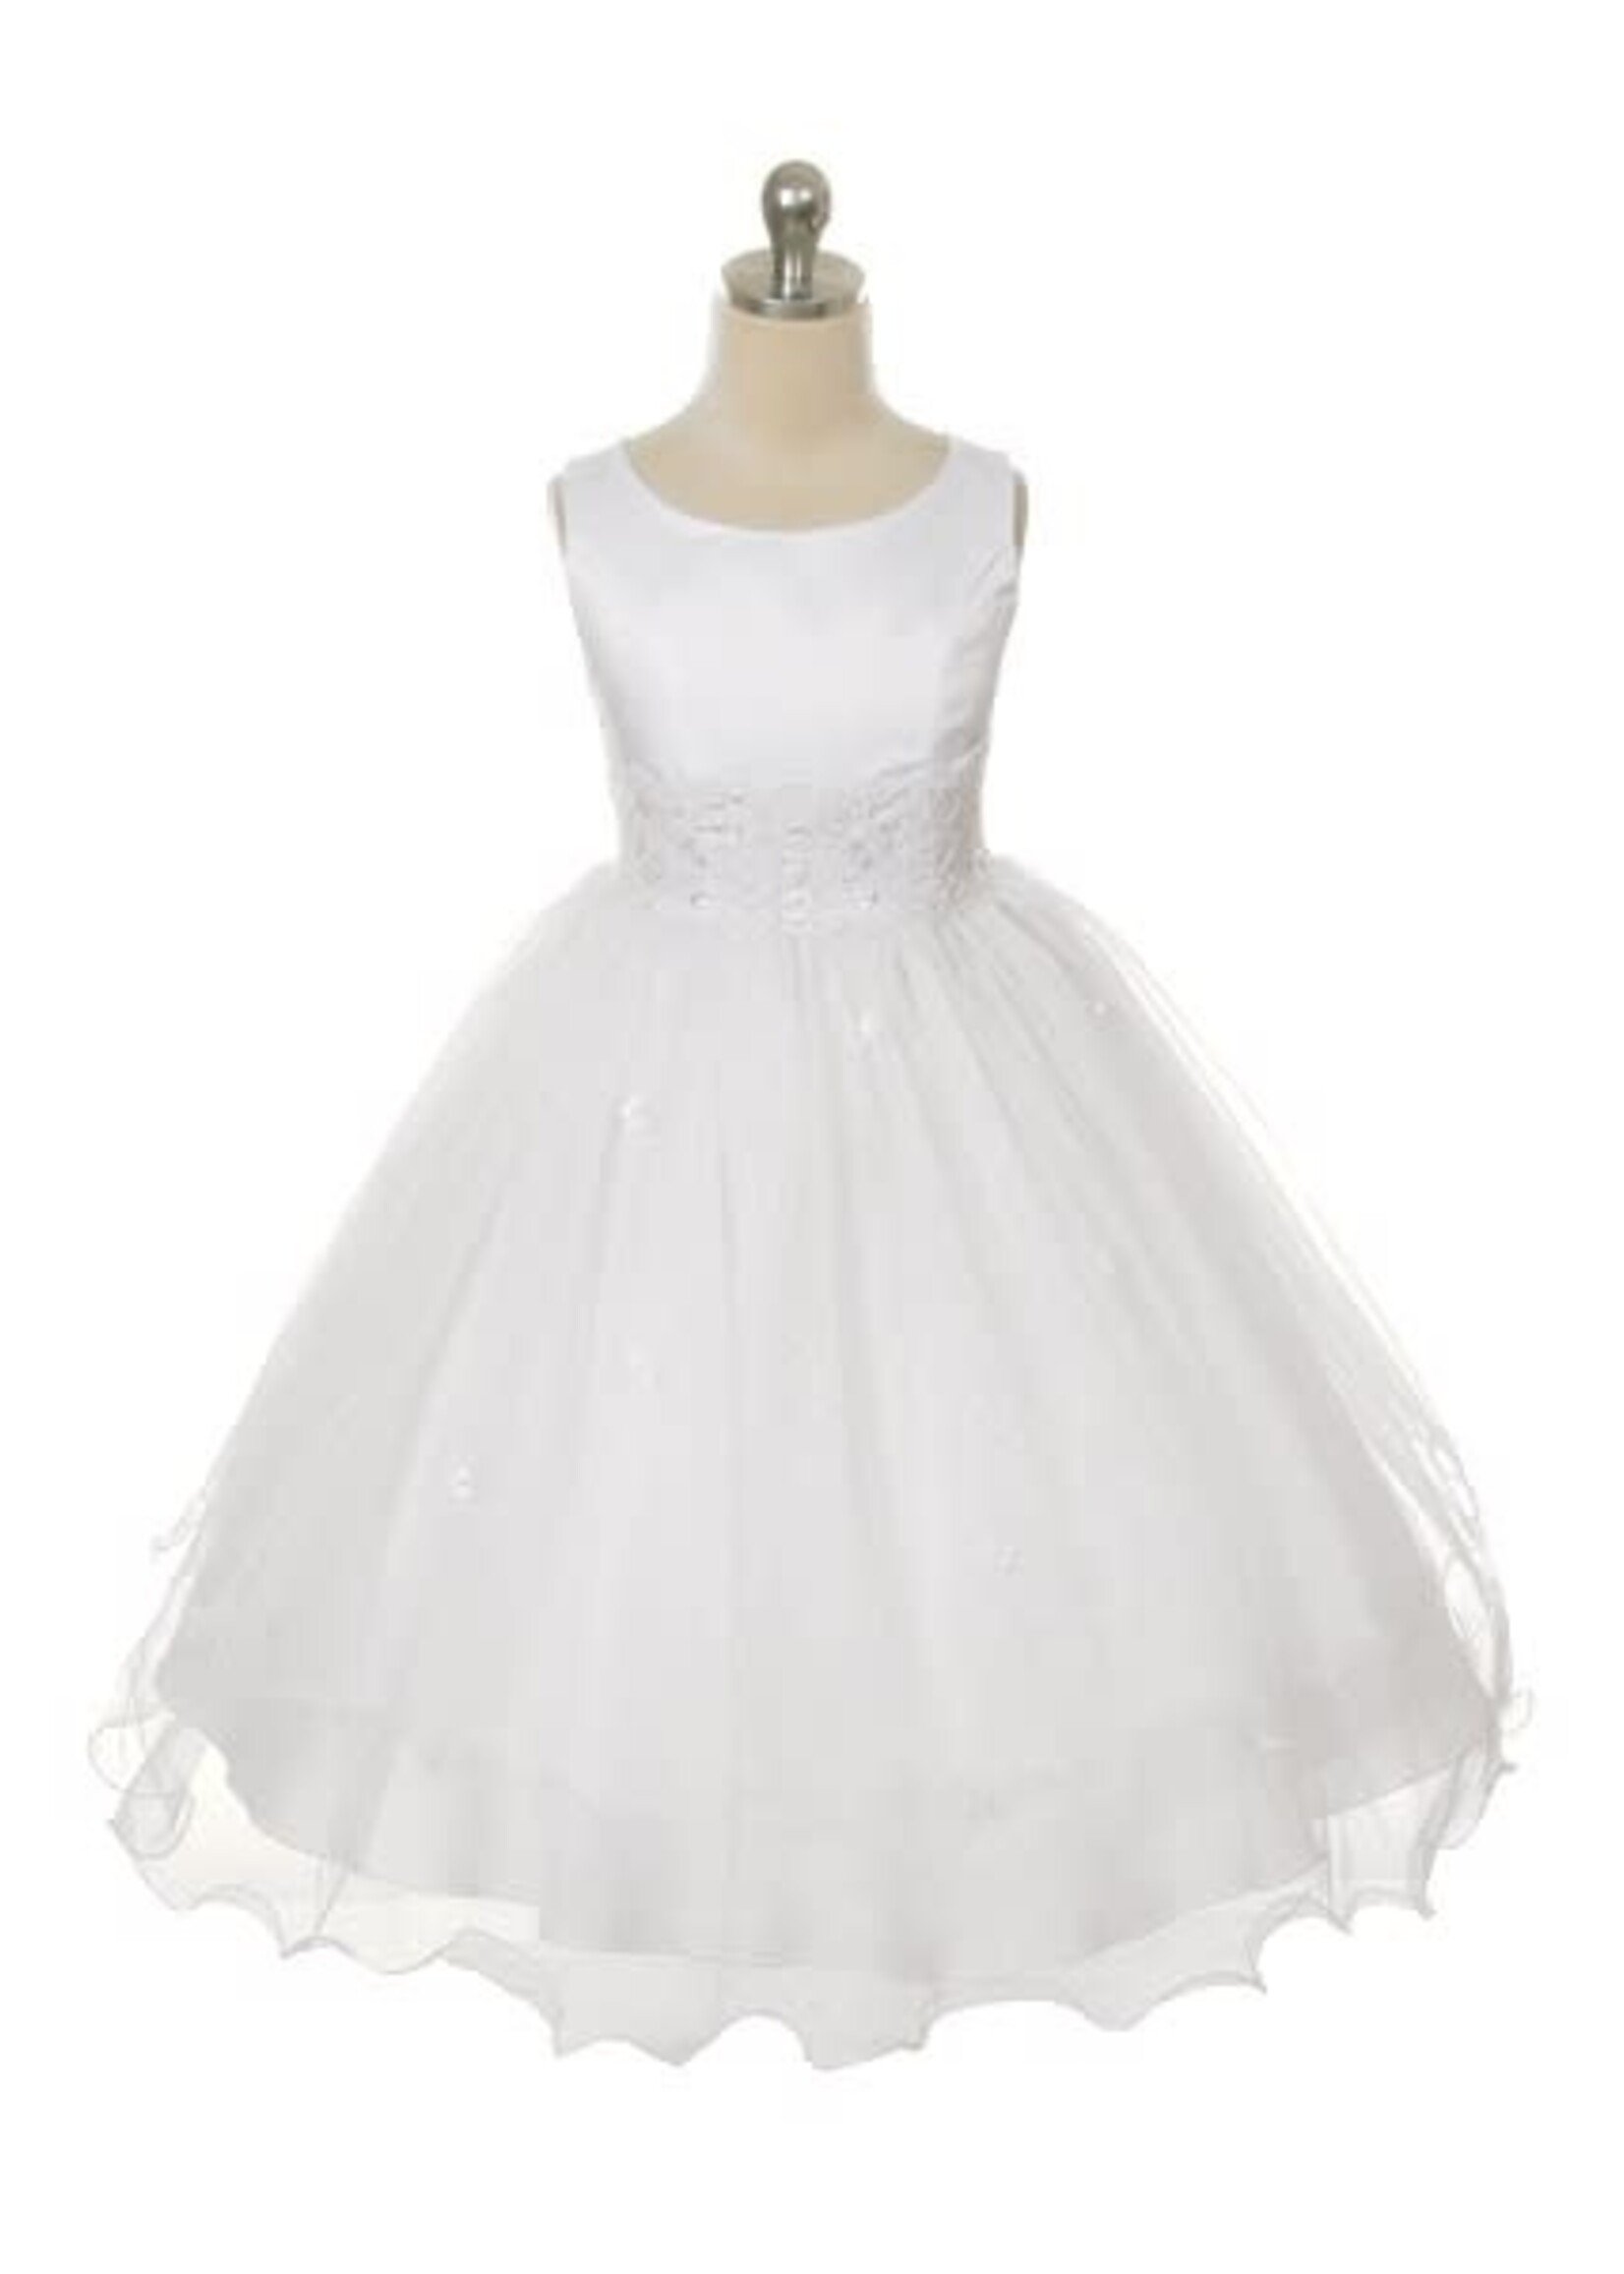 KD198 - HOLY COMMUNION GOWN